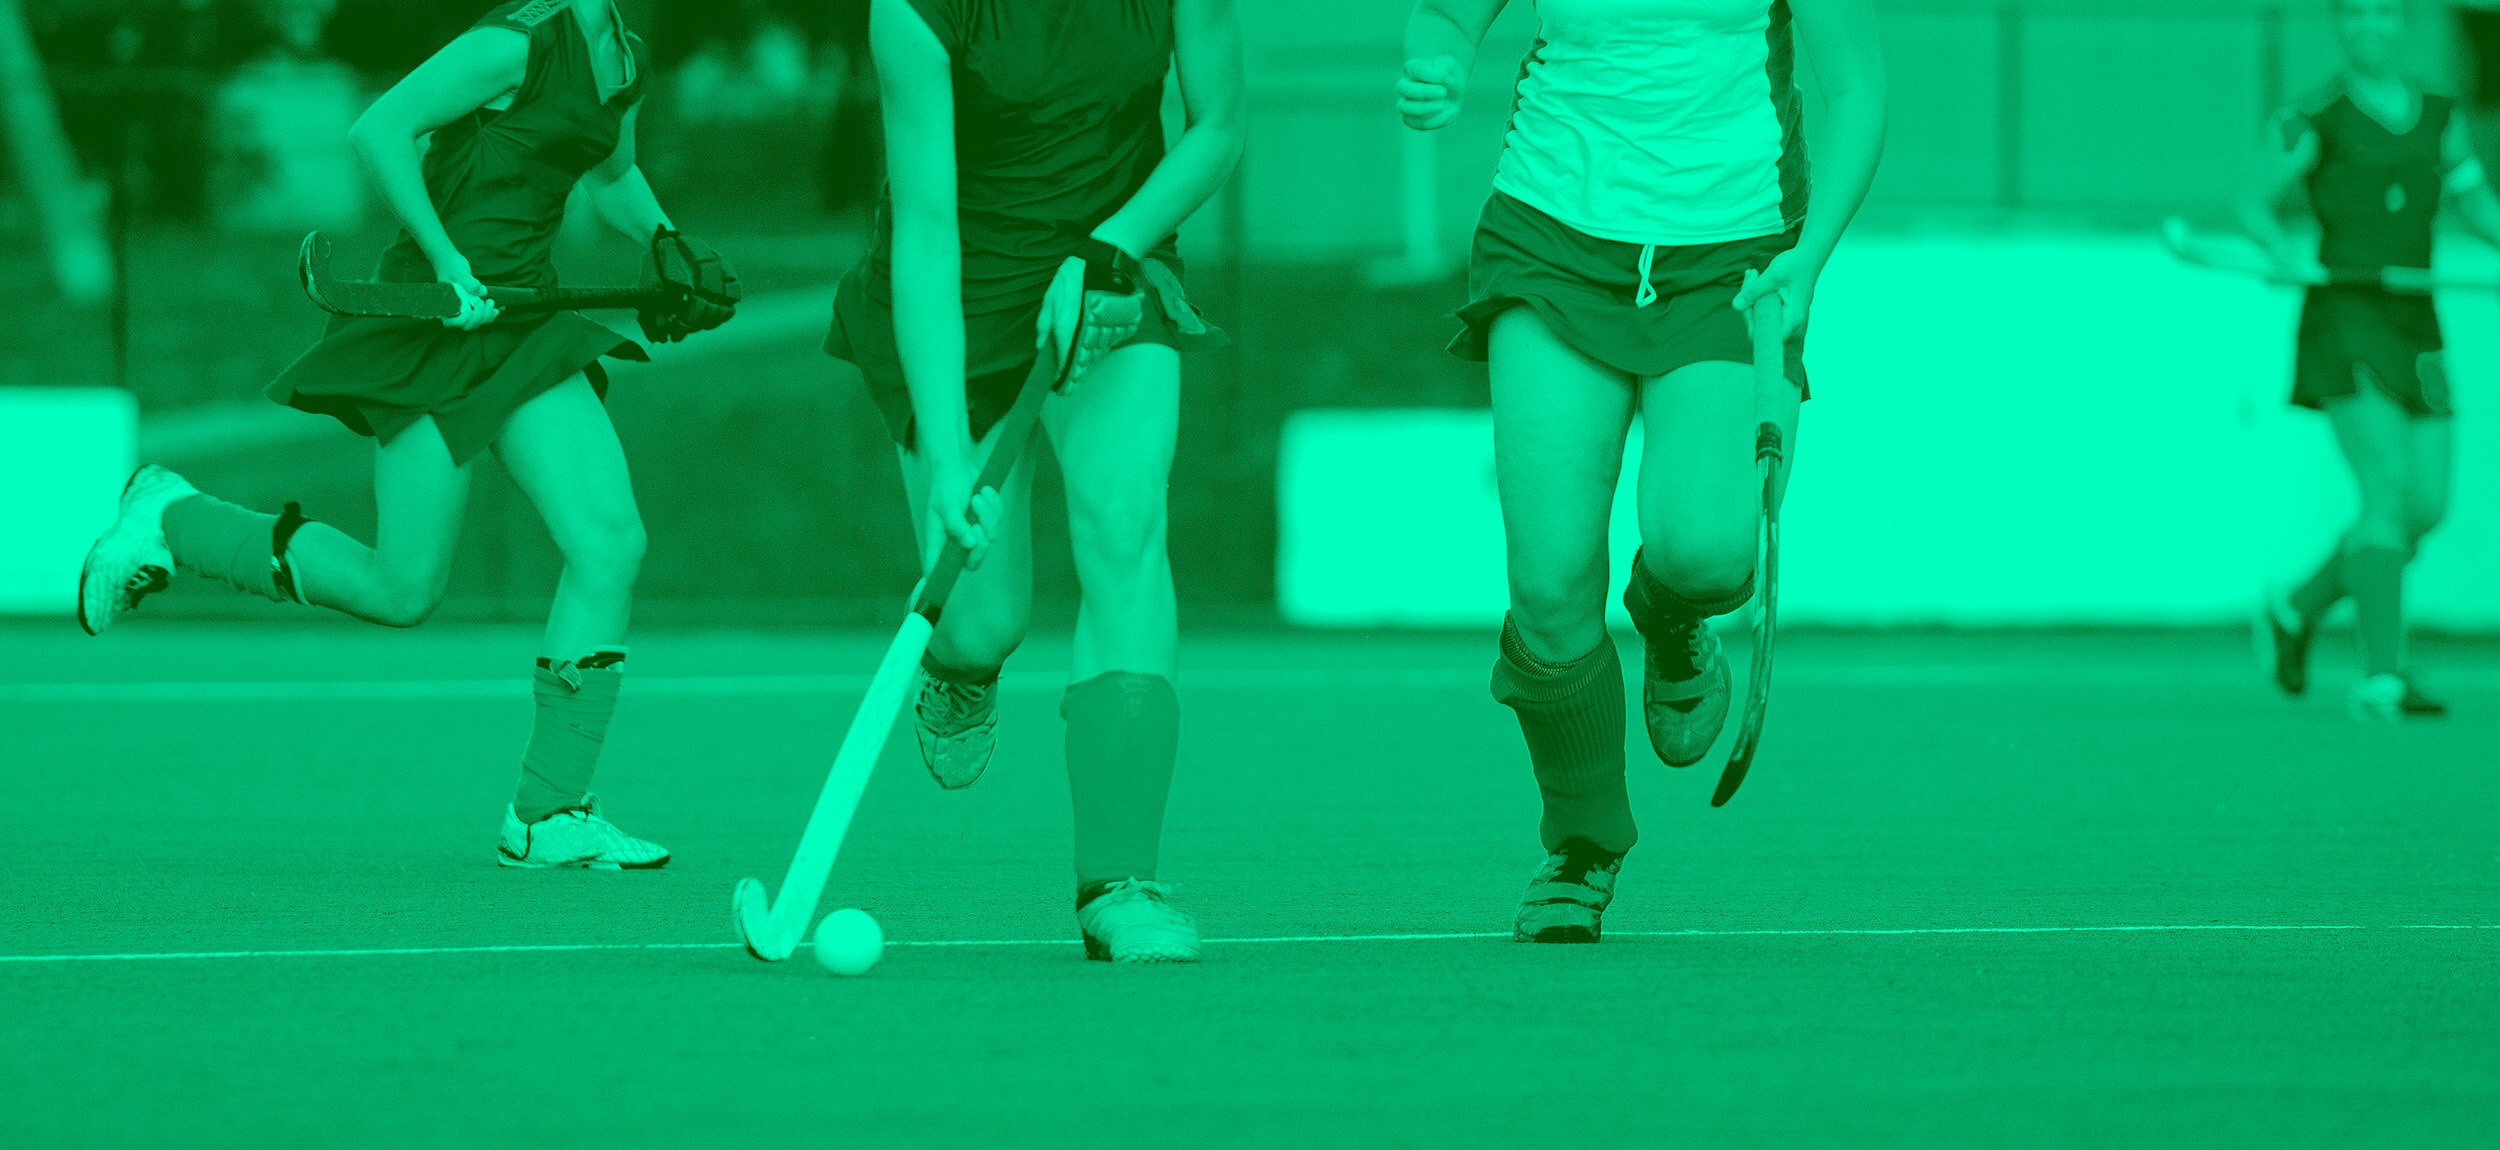 Field-Hockey-Youth-World-Games-Tournament-Portugal